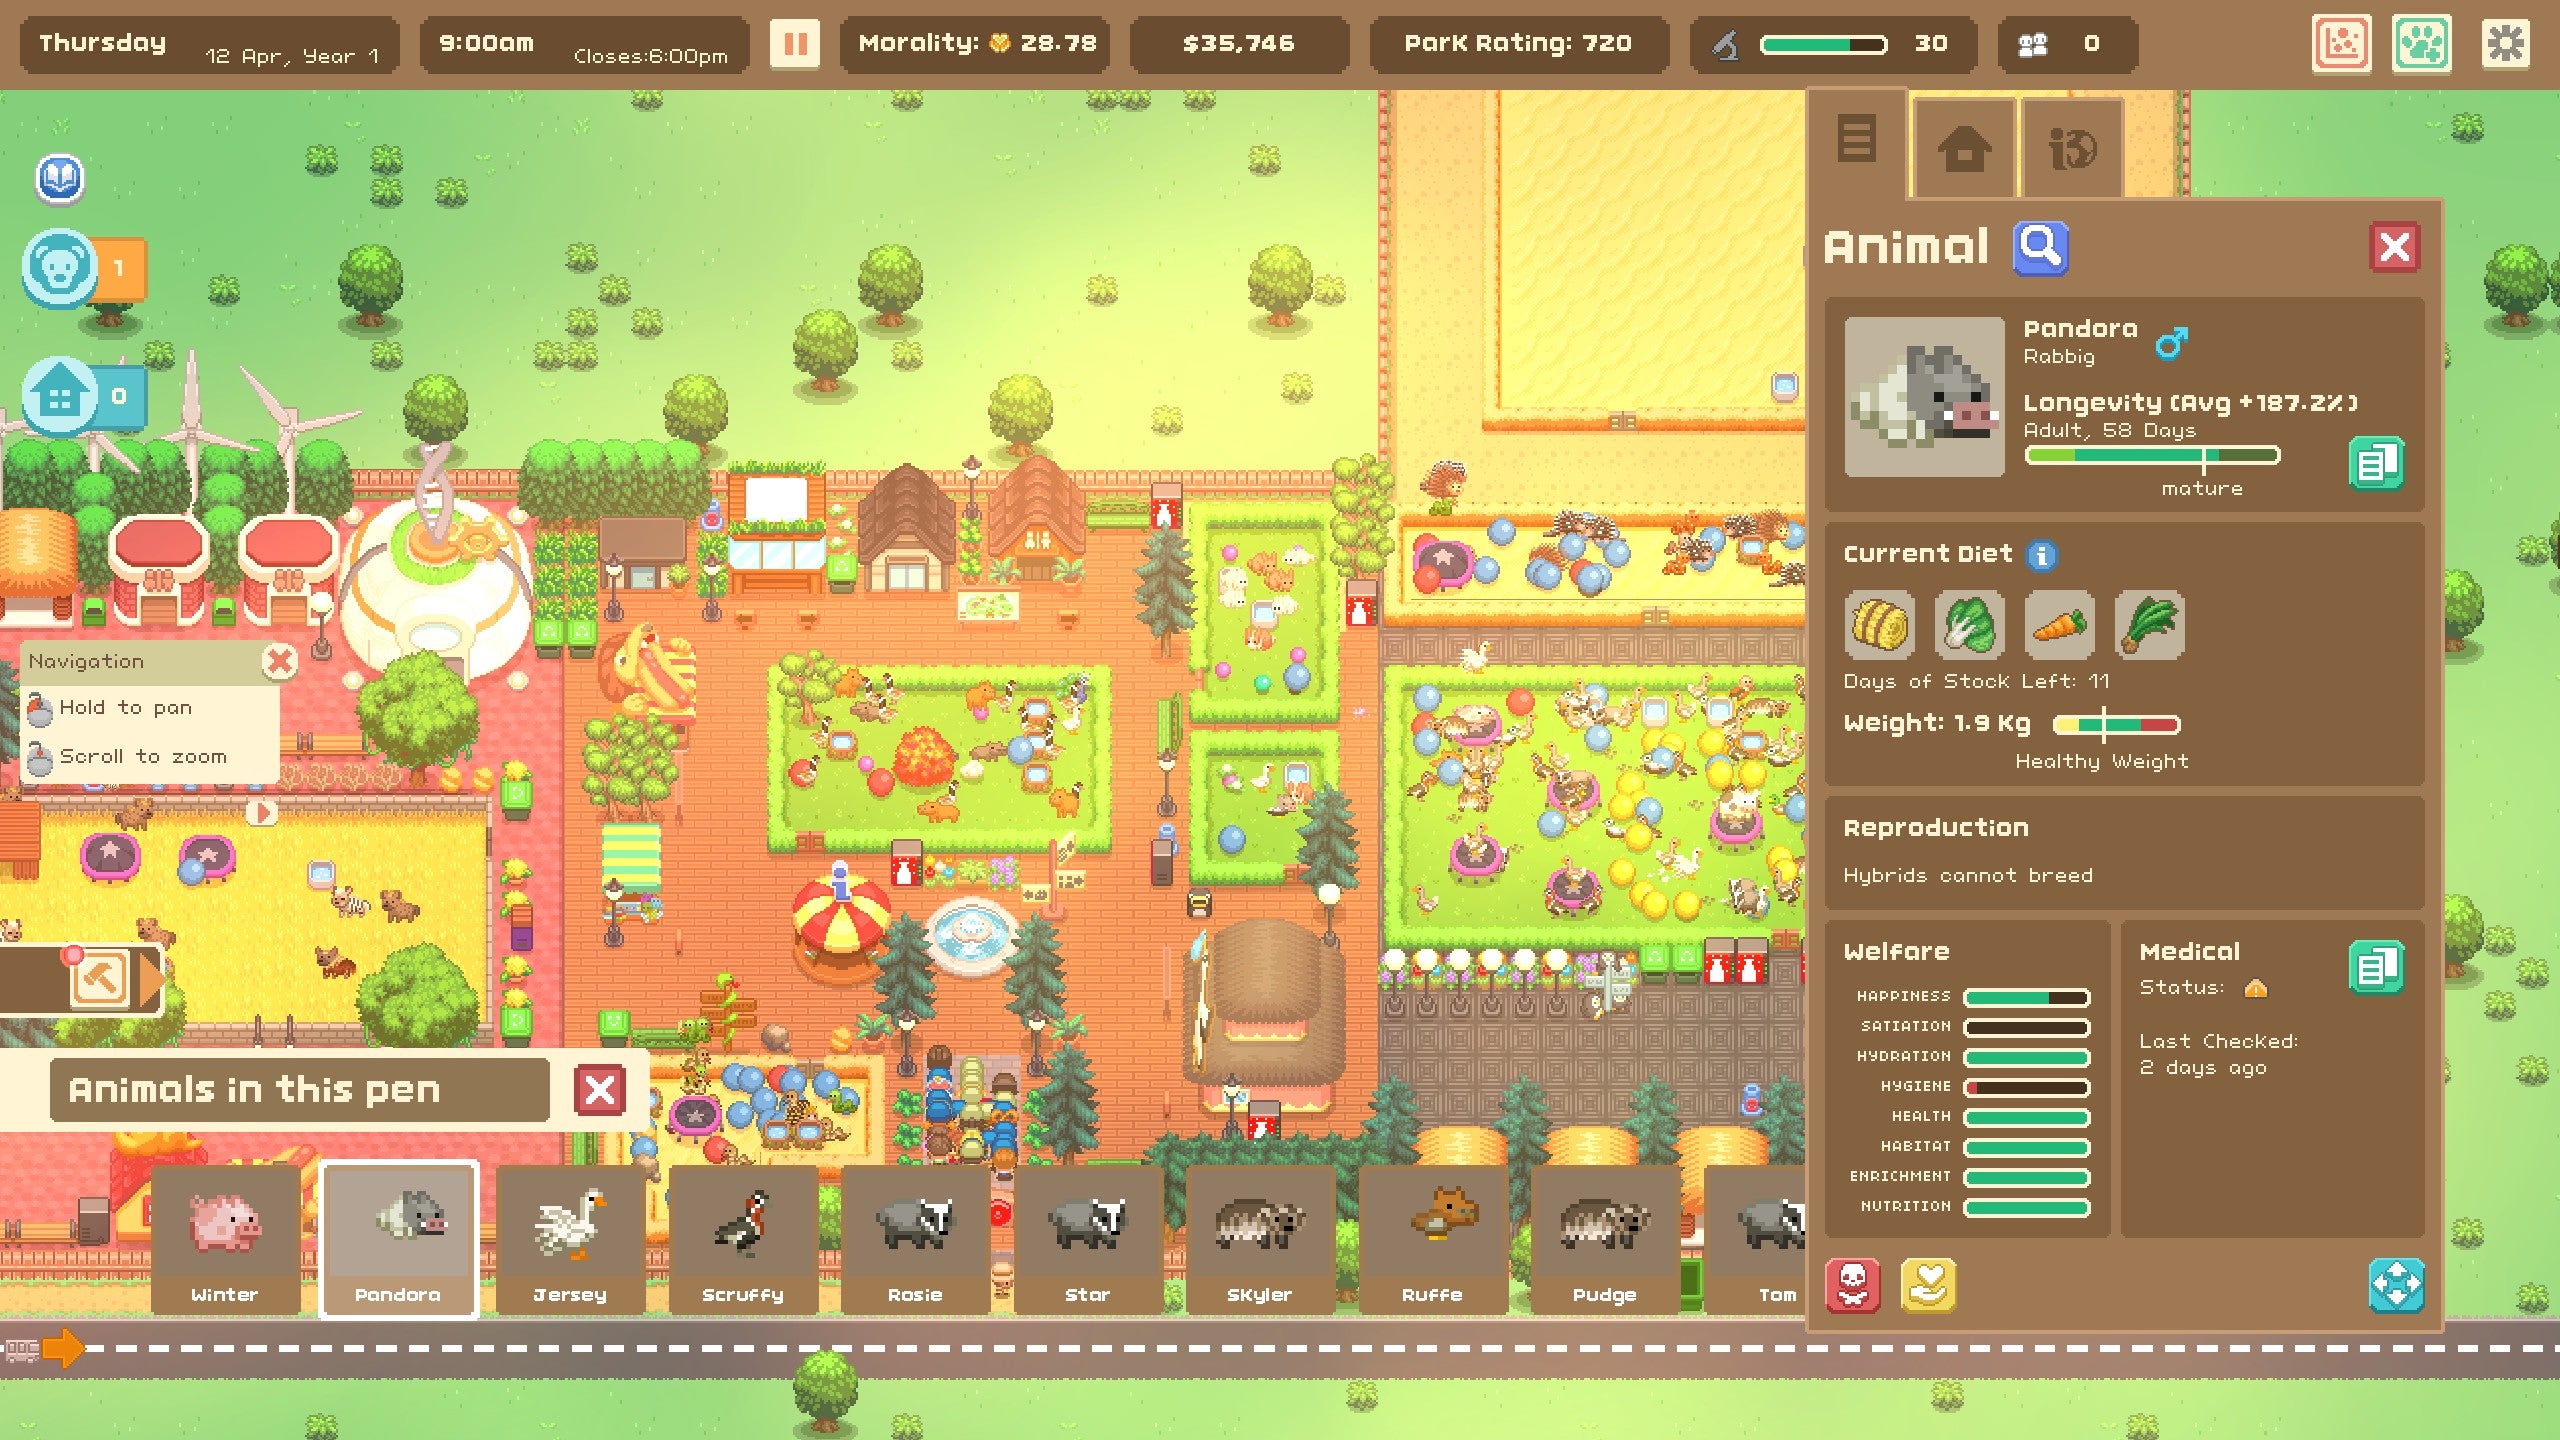 A screenshot of Let's Build A Zoo where the player has created a gene spliced hybrid between a rabbit and a pig, named a Rabbig.